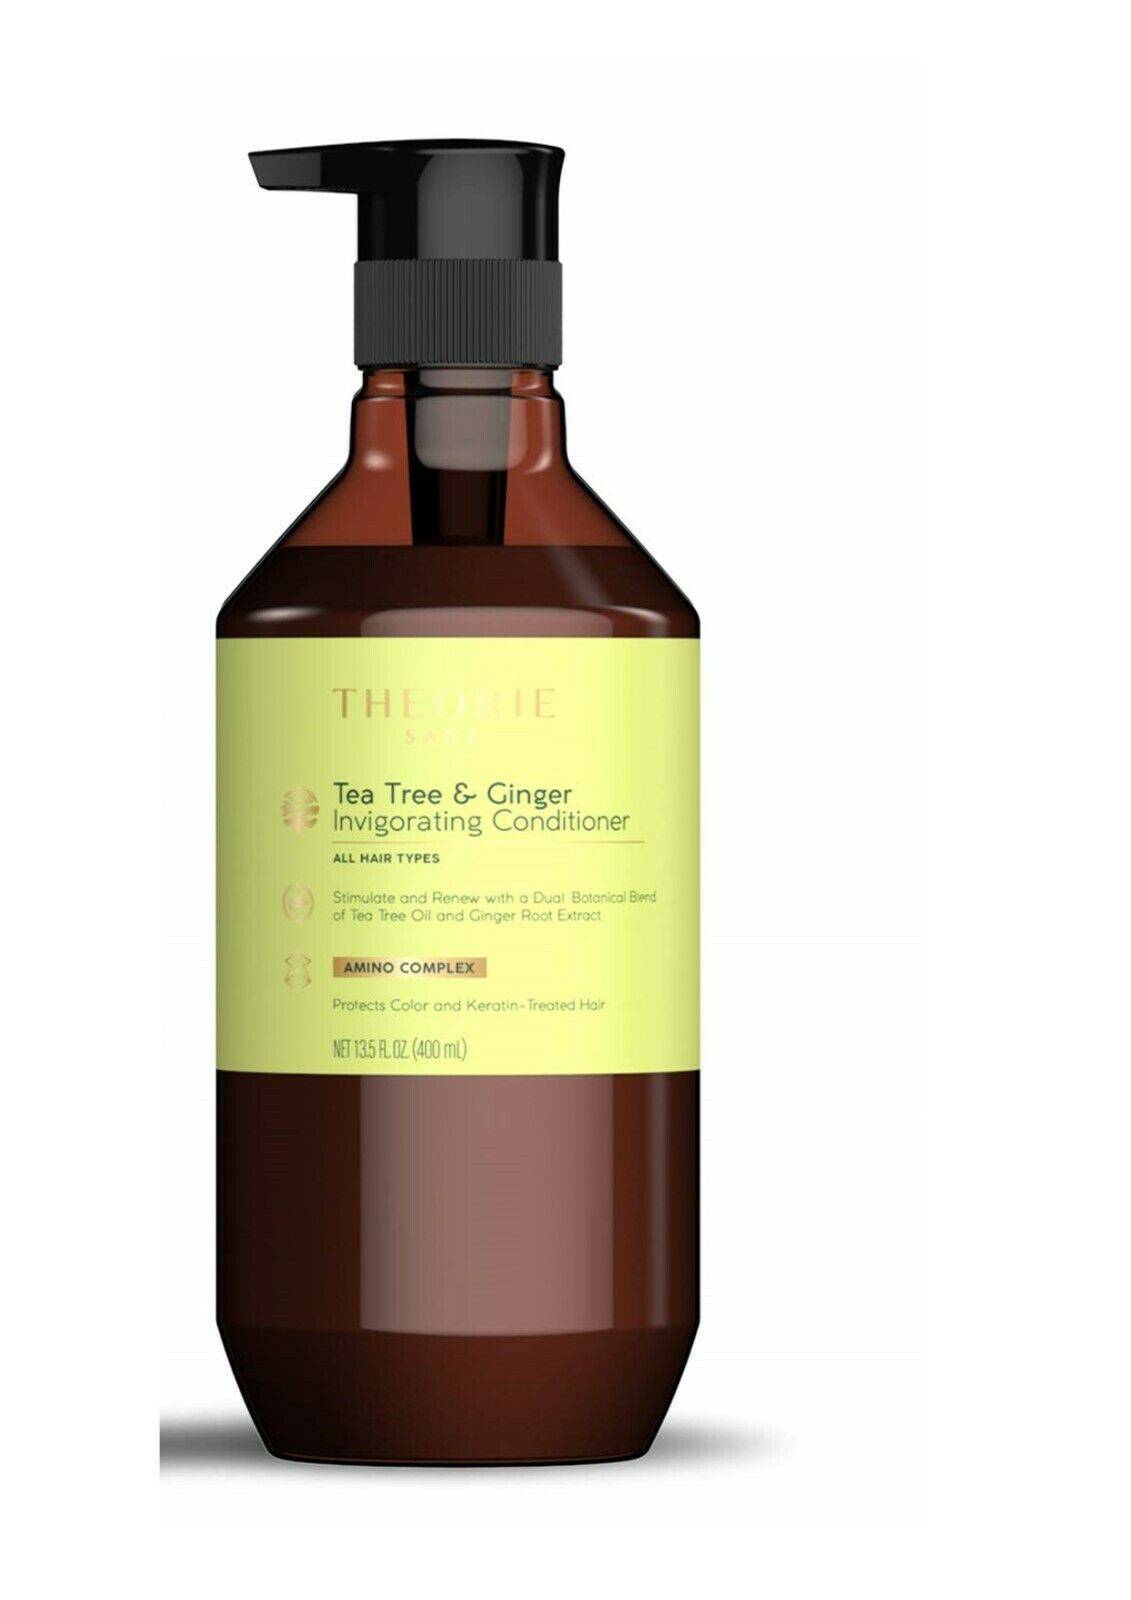 Theorie Tea Tree and Ginger invigorating Shampoo and Conditioner 400 ml Duo - On Line Hair Depot